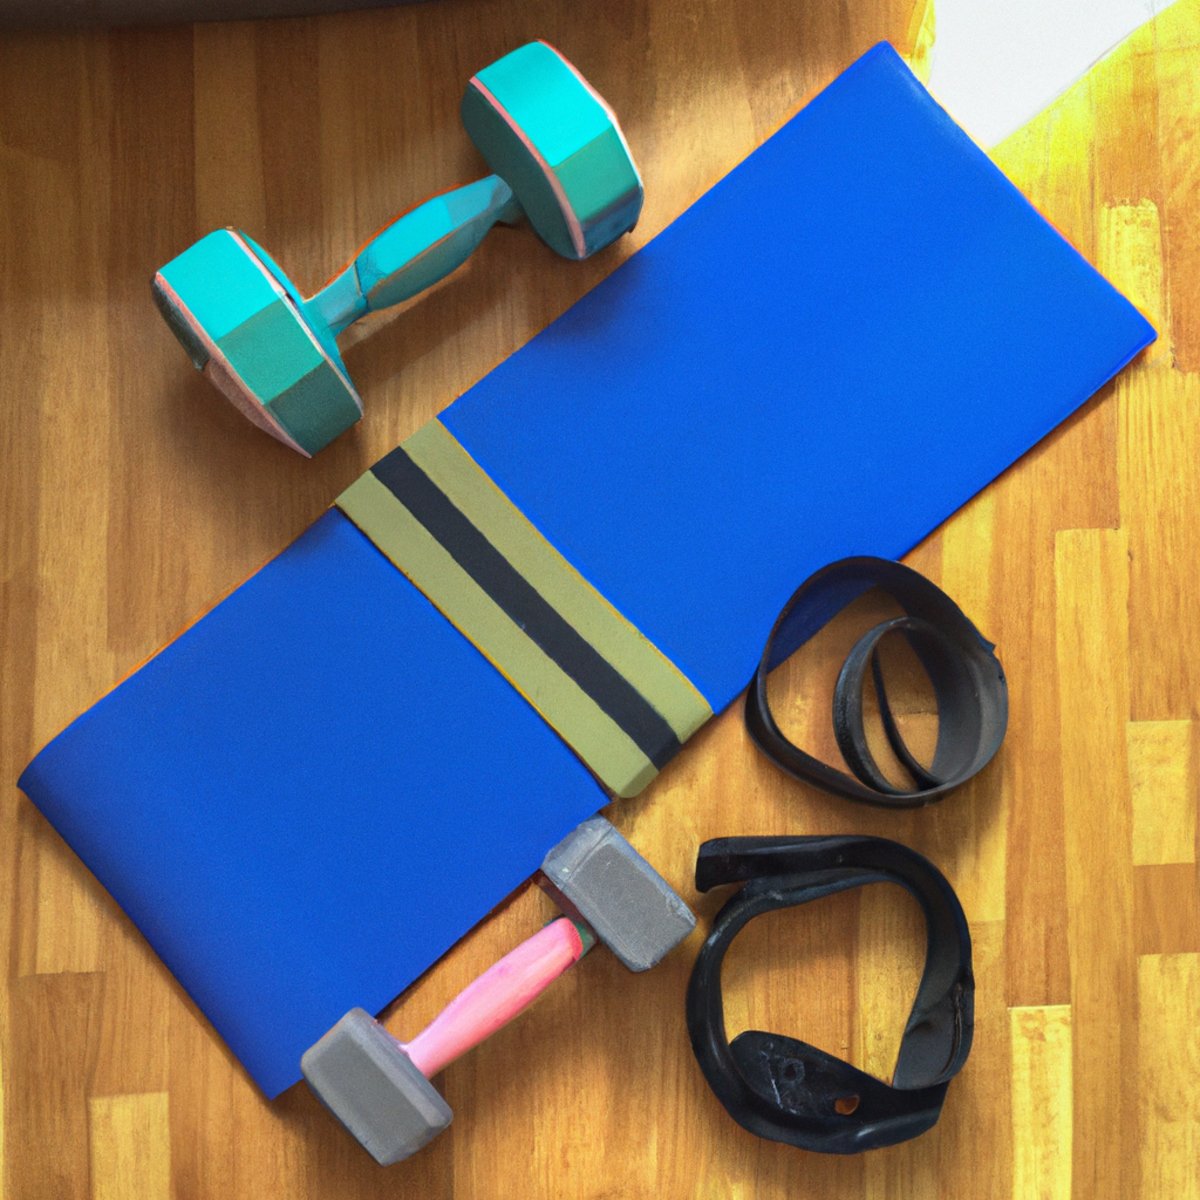 The photo captures a set of dumbbells, a resistance band, and a yoga mat arranged neatly on a wooden floor, ideal for Senior Exercises and Fitness. The dumbbells are of different weights, ranging from light to heavy, and are placed on either side of the resistance band. The band is stretched out in a straight line, ready to be used for exercises that require resistance. The yoga mat is rolled up and placed next to the equipment, indicating that it can be used for floor exercises. The lighting in the photo is bright and natural, highlighting the texture of the wooden floor and the details of the equipment. The overall impression is one of simplicity and accessibility, suggesting that seniors can use these objects to maintain their strength and mobility through targeted exercises and fitness routines.